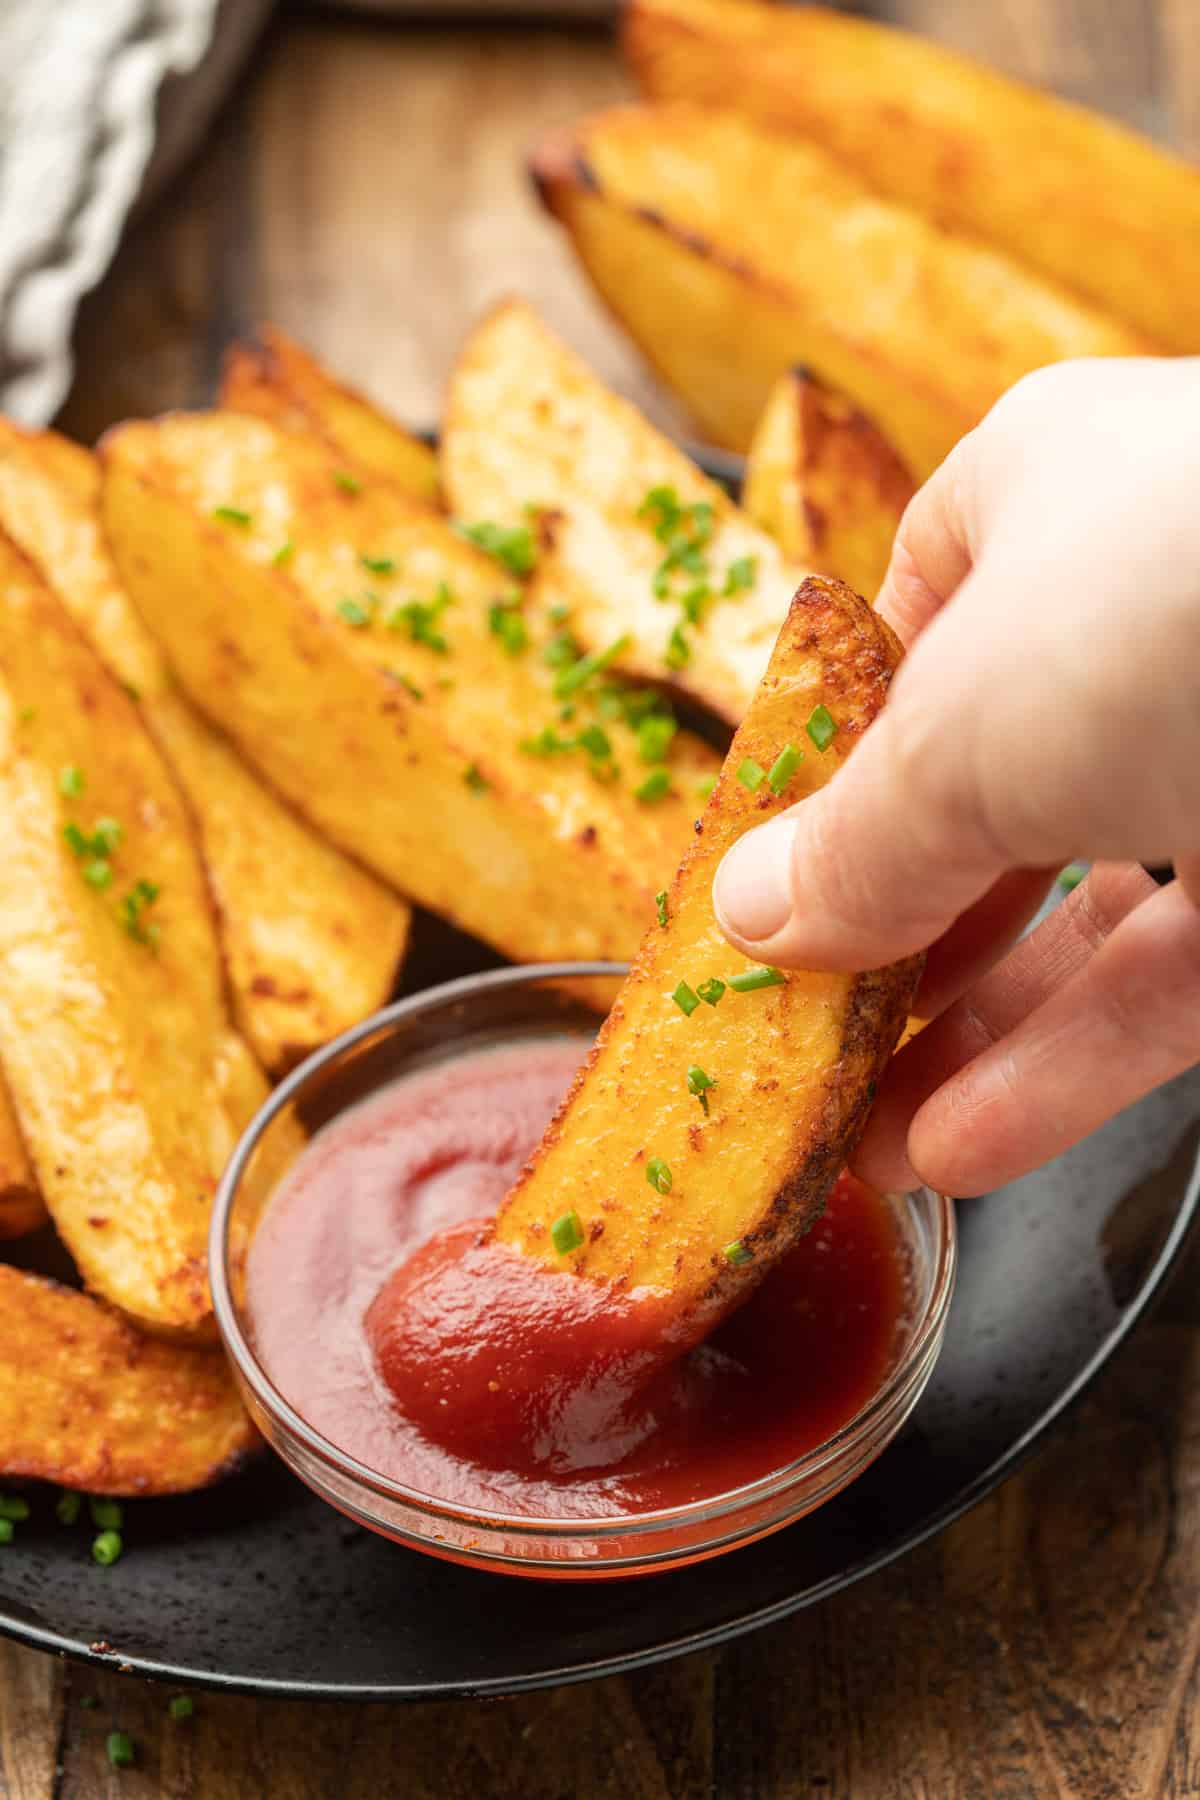 Hand dipping an Air Fryer Potato Wedge in a dish of ketchup.